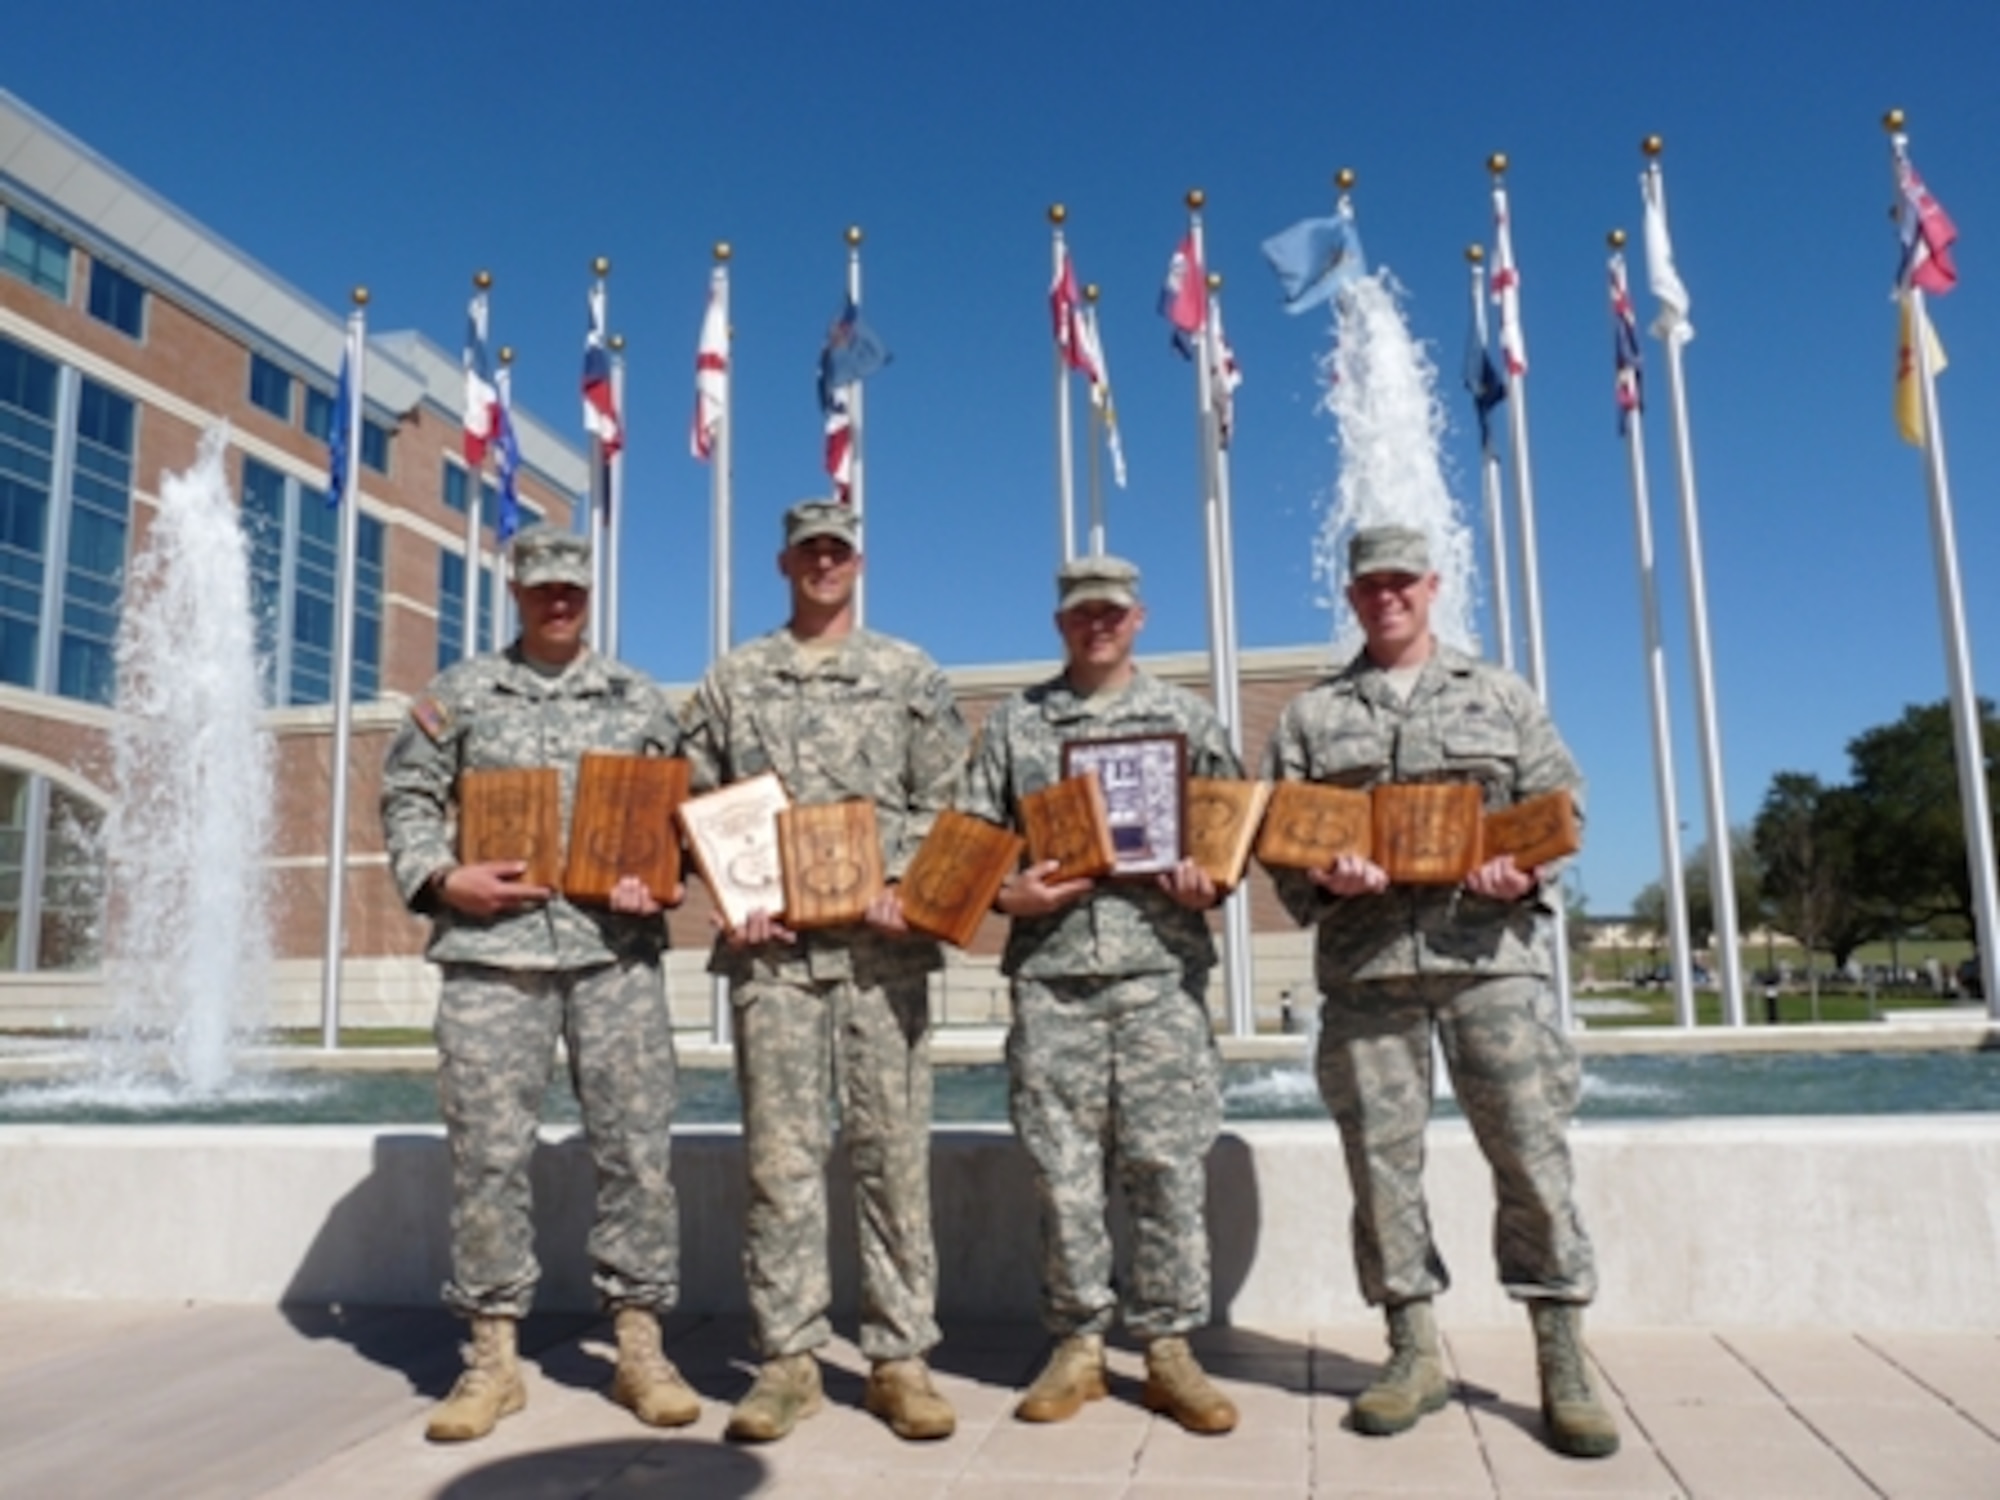 The Missouri National Guard's team "Regular Forces" took second place in overall team competition and scored high individually at the All Army Small Arms Championships at Fort Benning, Ga., in early March. Missouri Guard team members are (from left) Staff Sgt. Jody Salcido, Sgt. 1st Class James Phelps, Sgt. James Whitener and Master Sgt. Benjamin Israel. (Ann Keyes/Missouri National Guard)